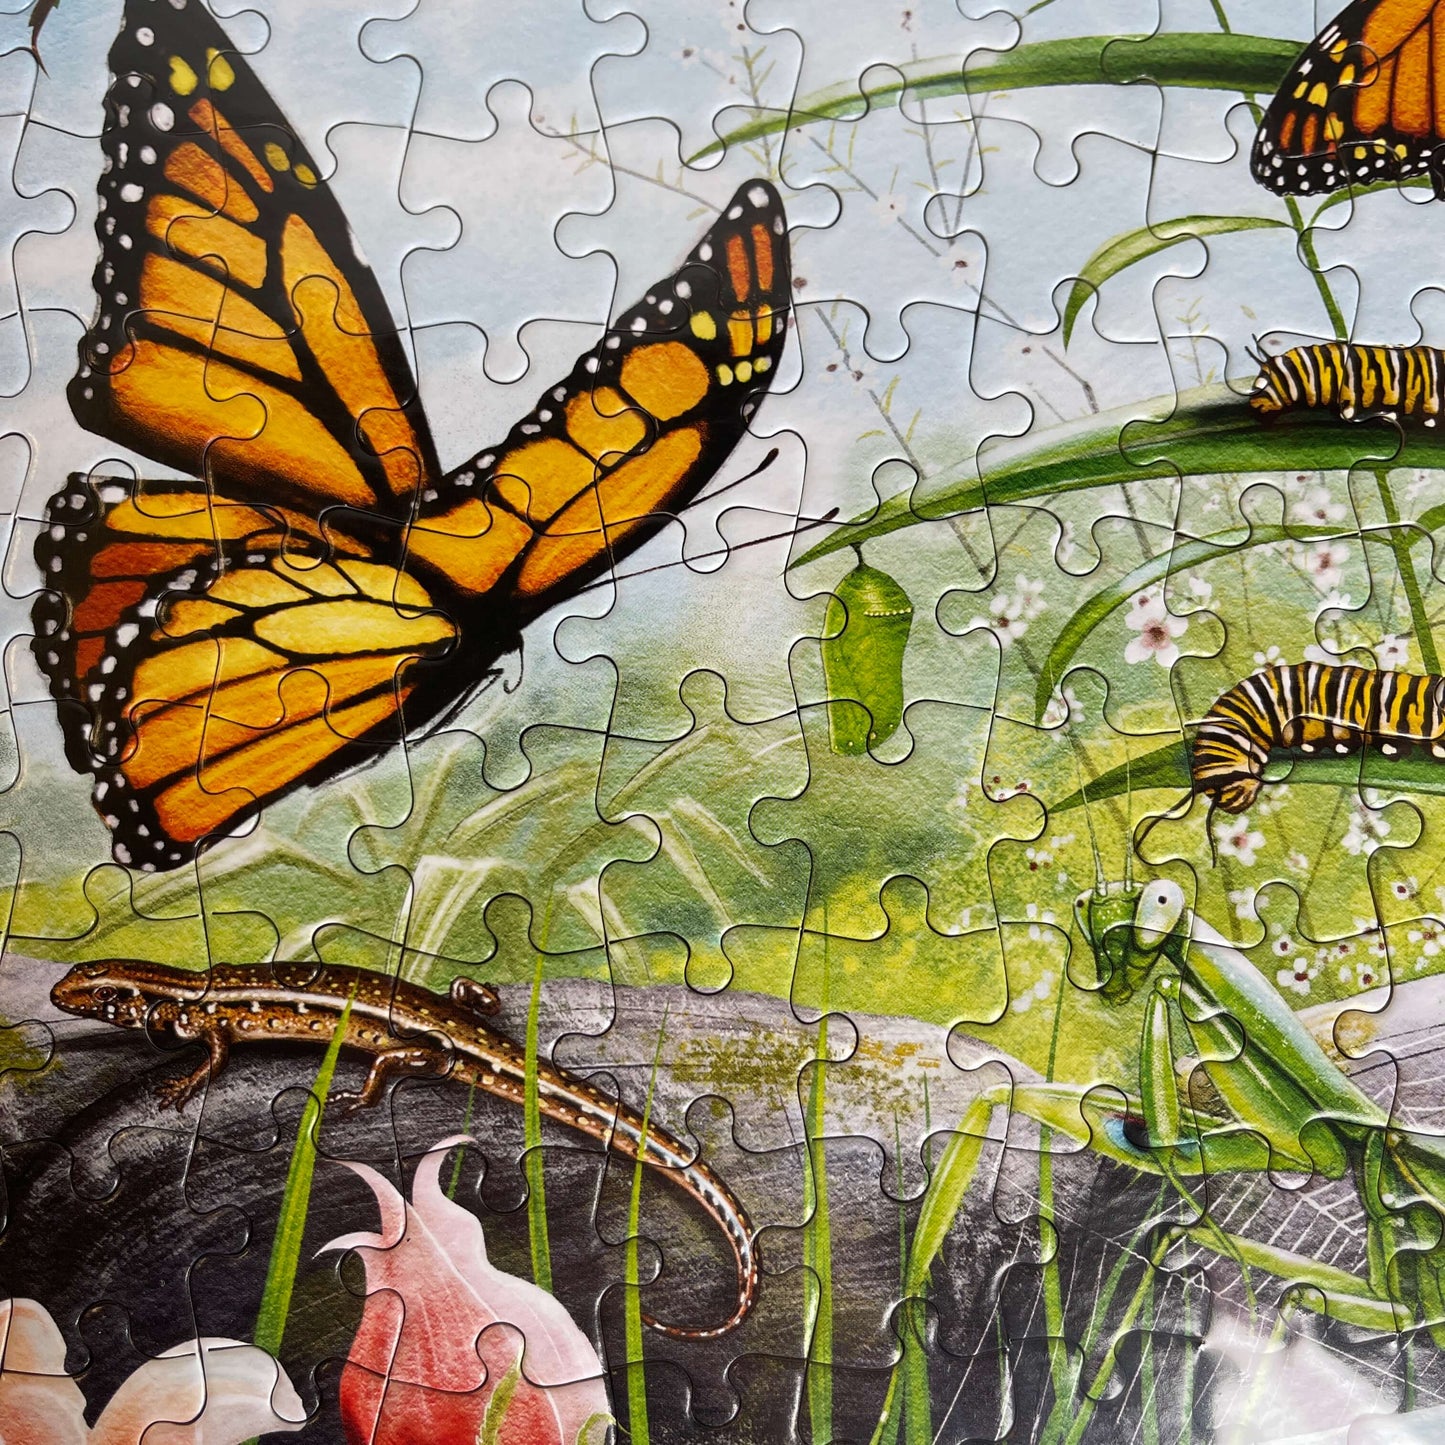 Jigsaw puzzle featuring Monarch butterflies and other insects.